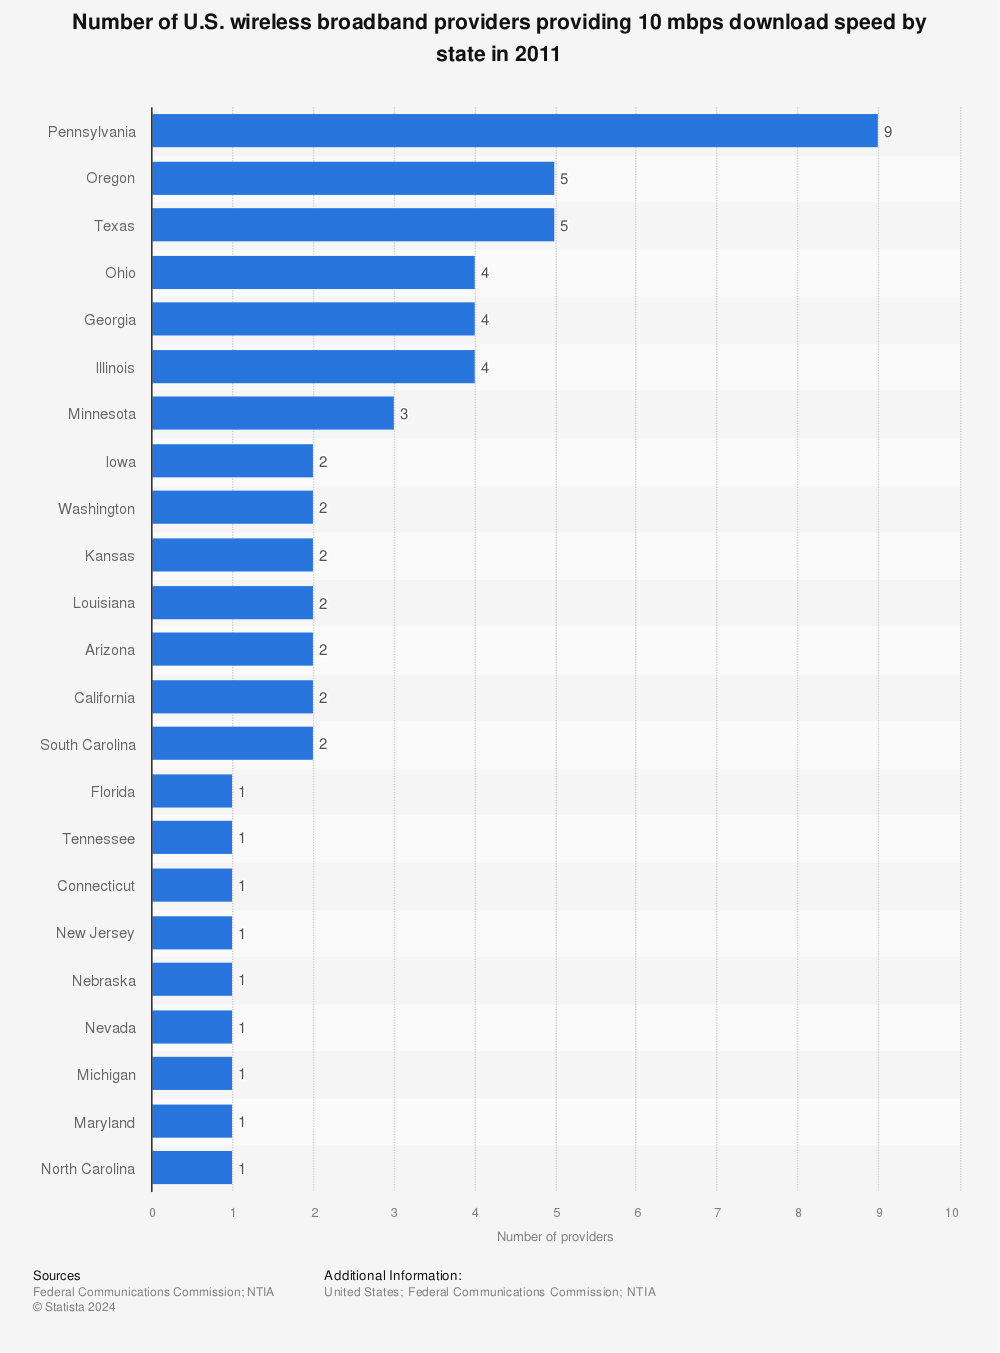 Statistic: Number of U.S. wireless broadband providers providing 10 mbps download speed by state in 2011 | Statista